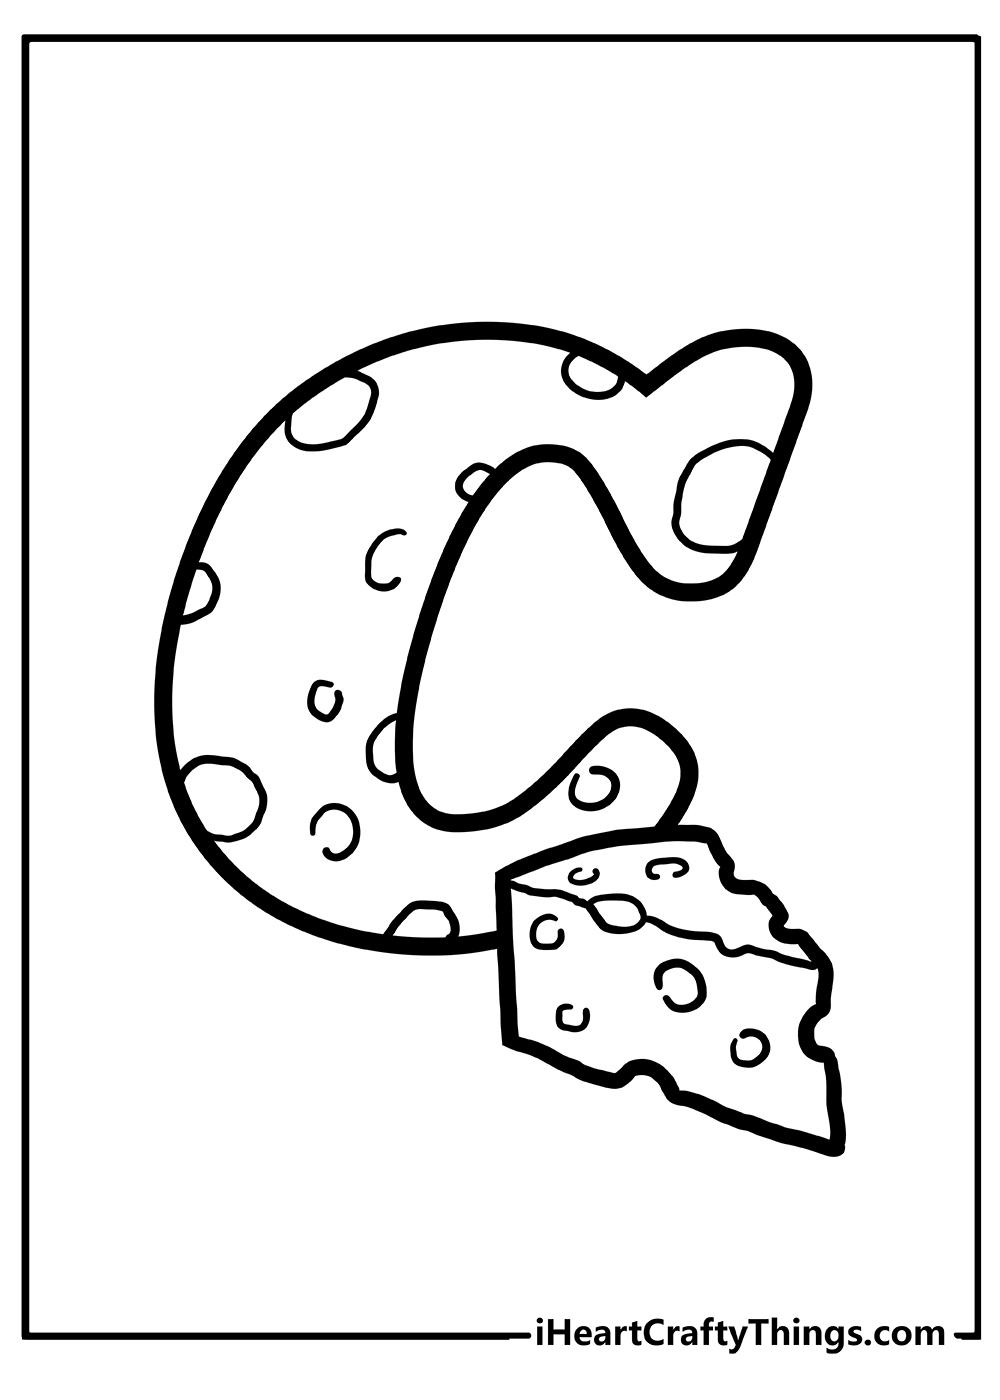 Letter C Coloring Book for adults free download